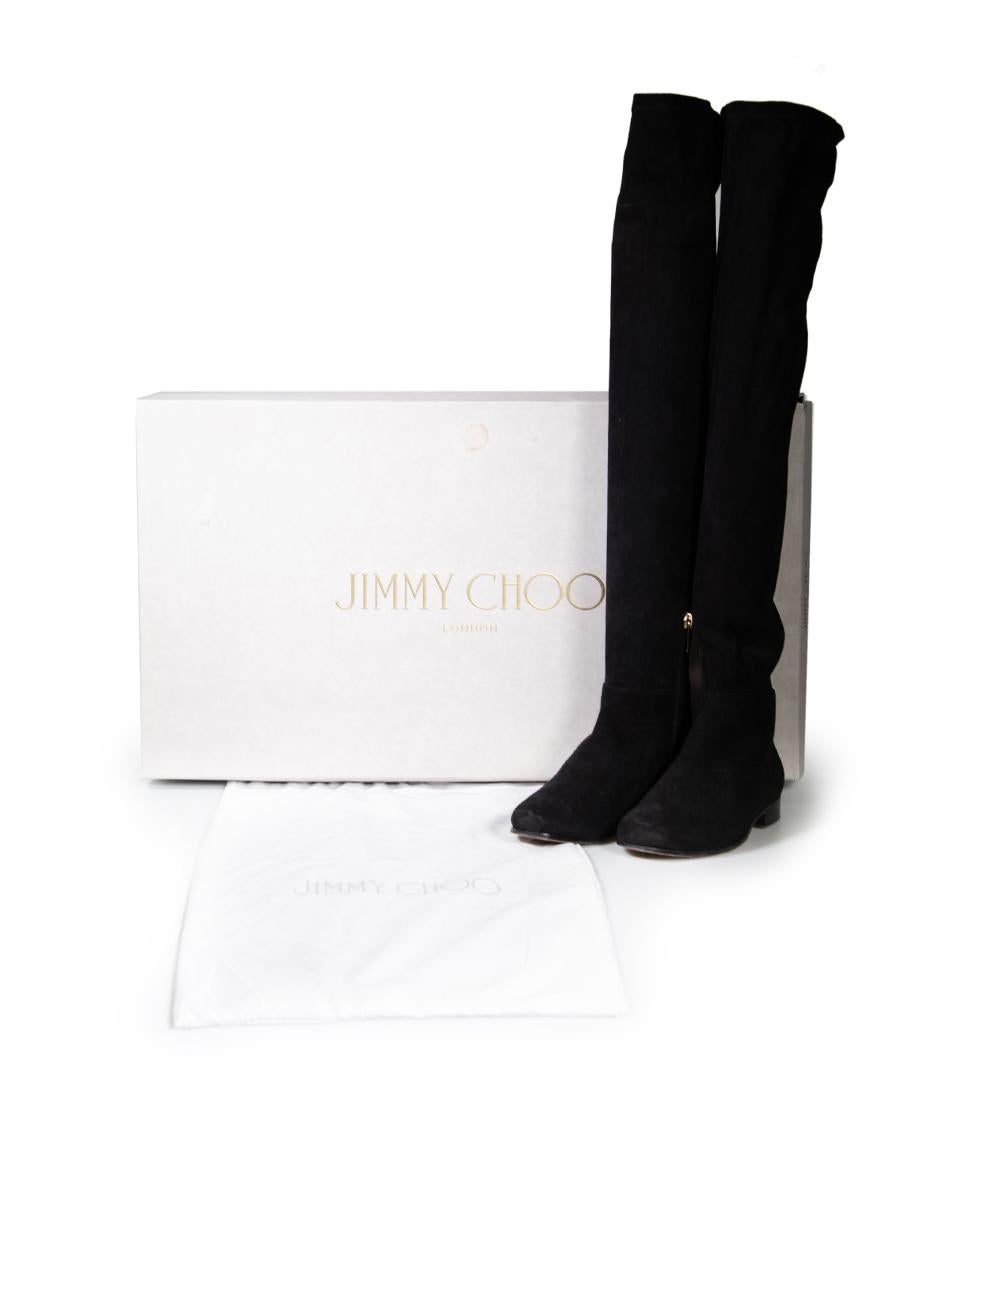 Jimmy Choo Black Suede Myren Over The Knee Boots Size IT 35 For Sale 3